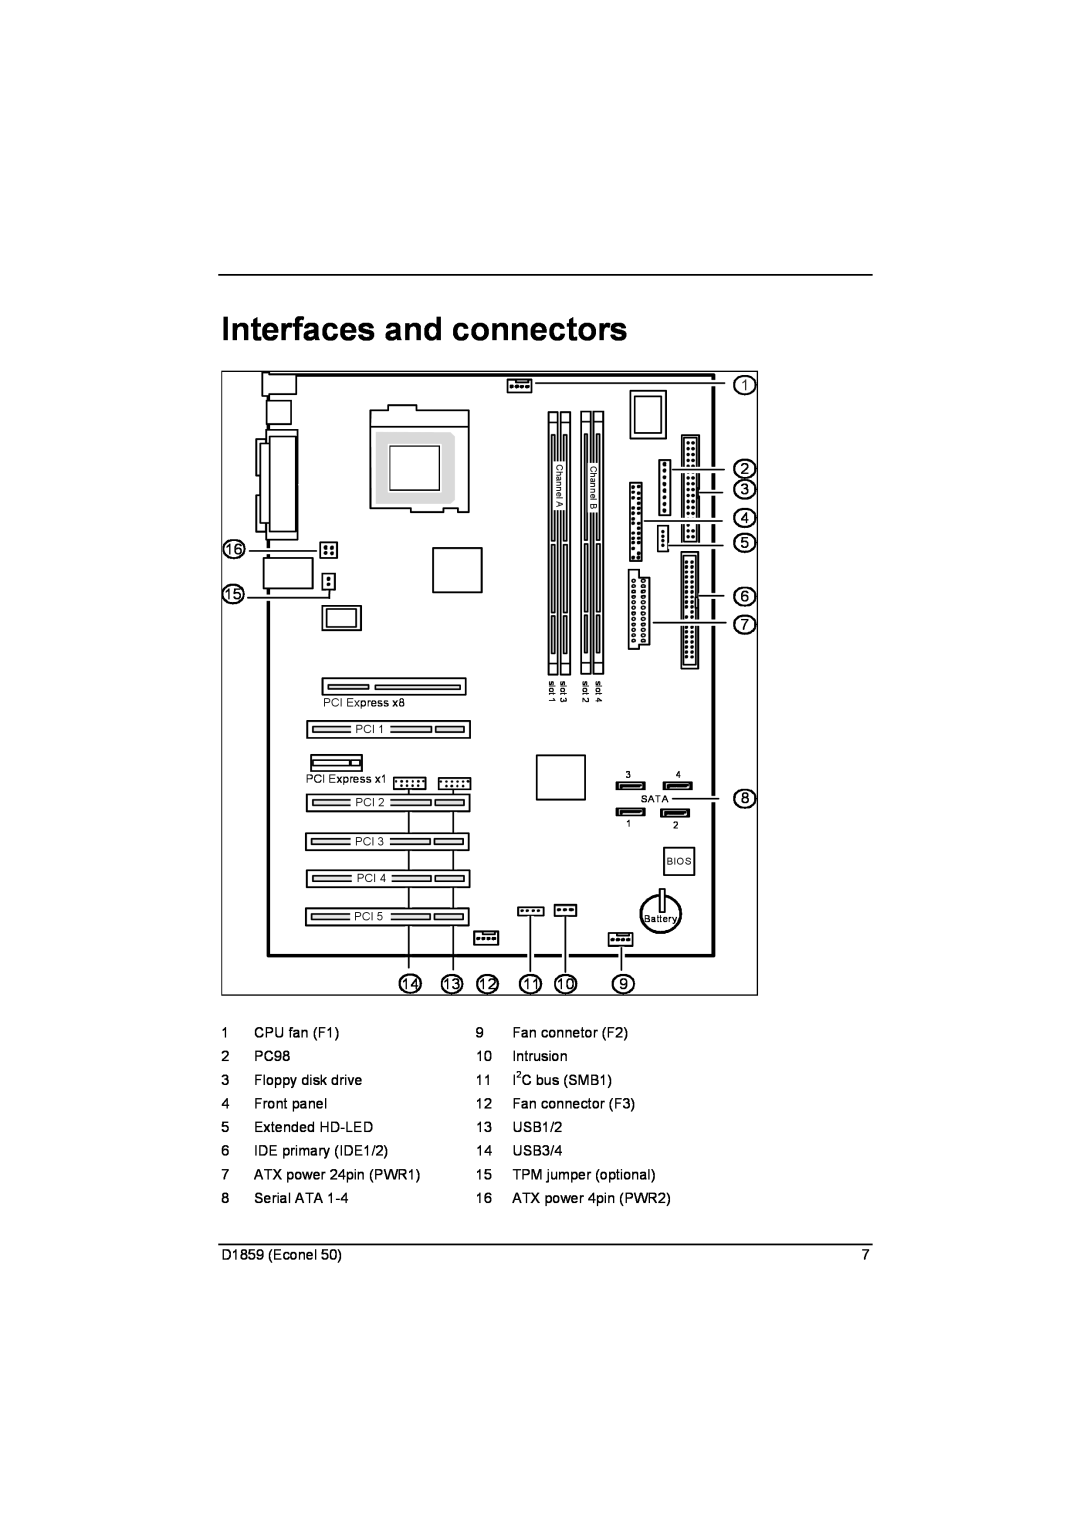 Fujitsu D1859 technical manual Interfaces and connectors, ATX power 4pin PWR2 